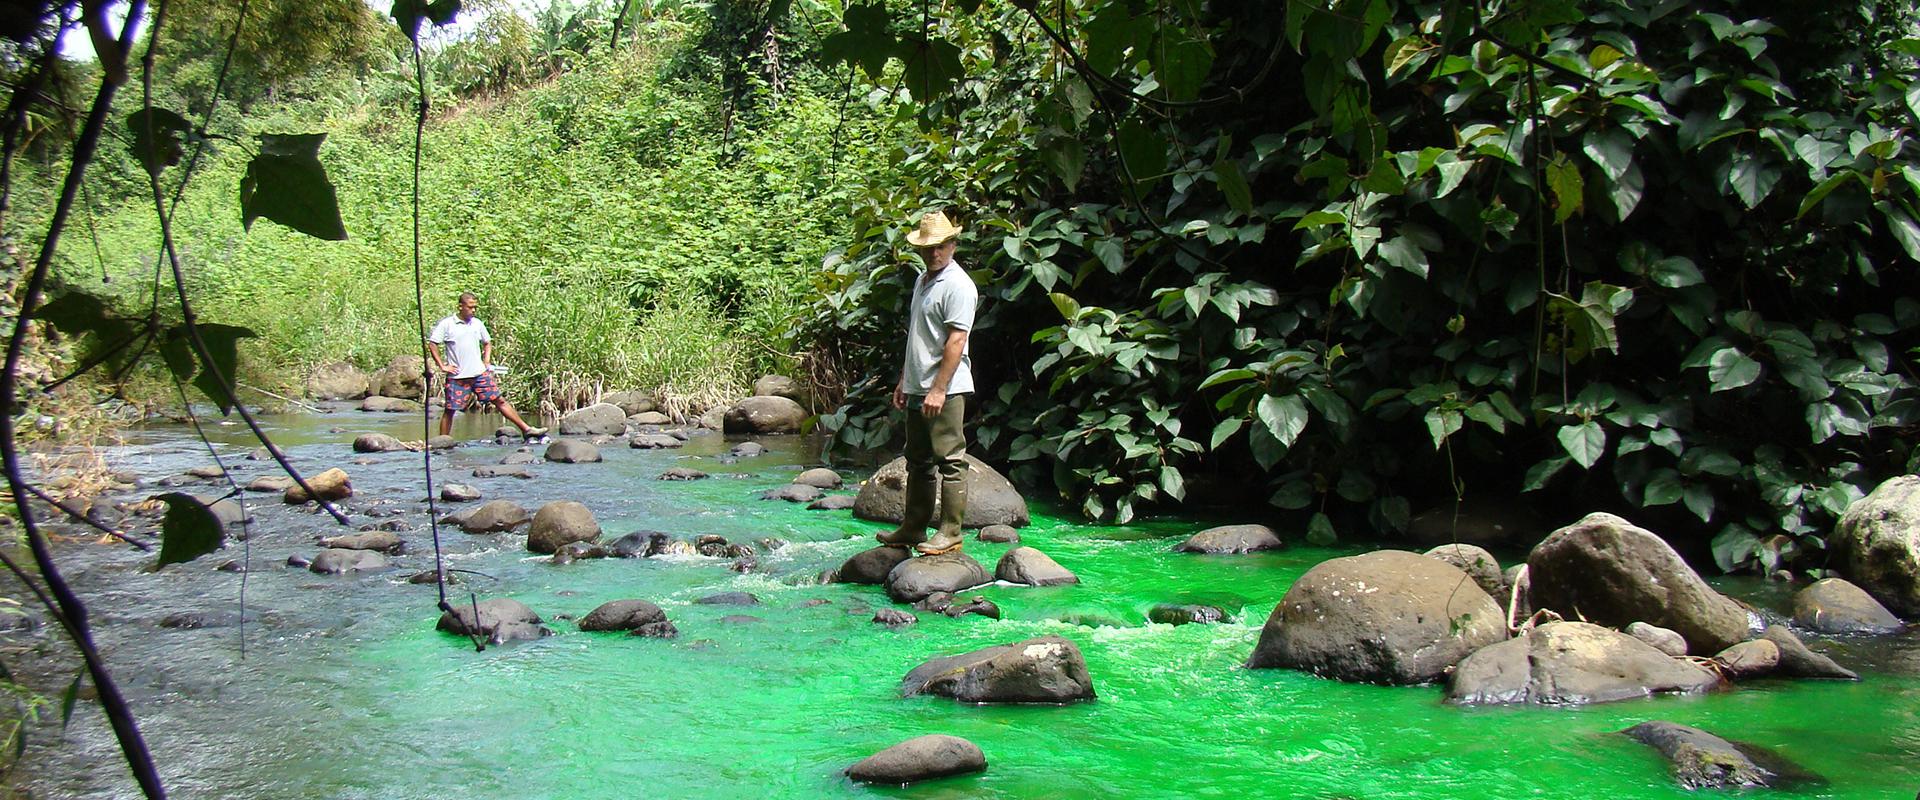 Injecting a tracer prior to taking measurements of river water, Réunion Island